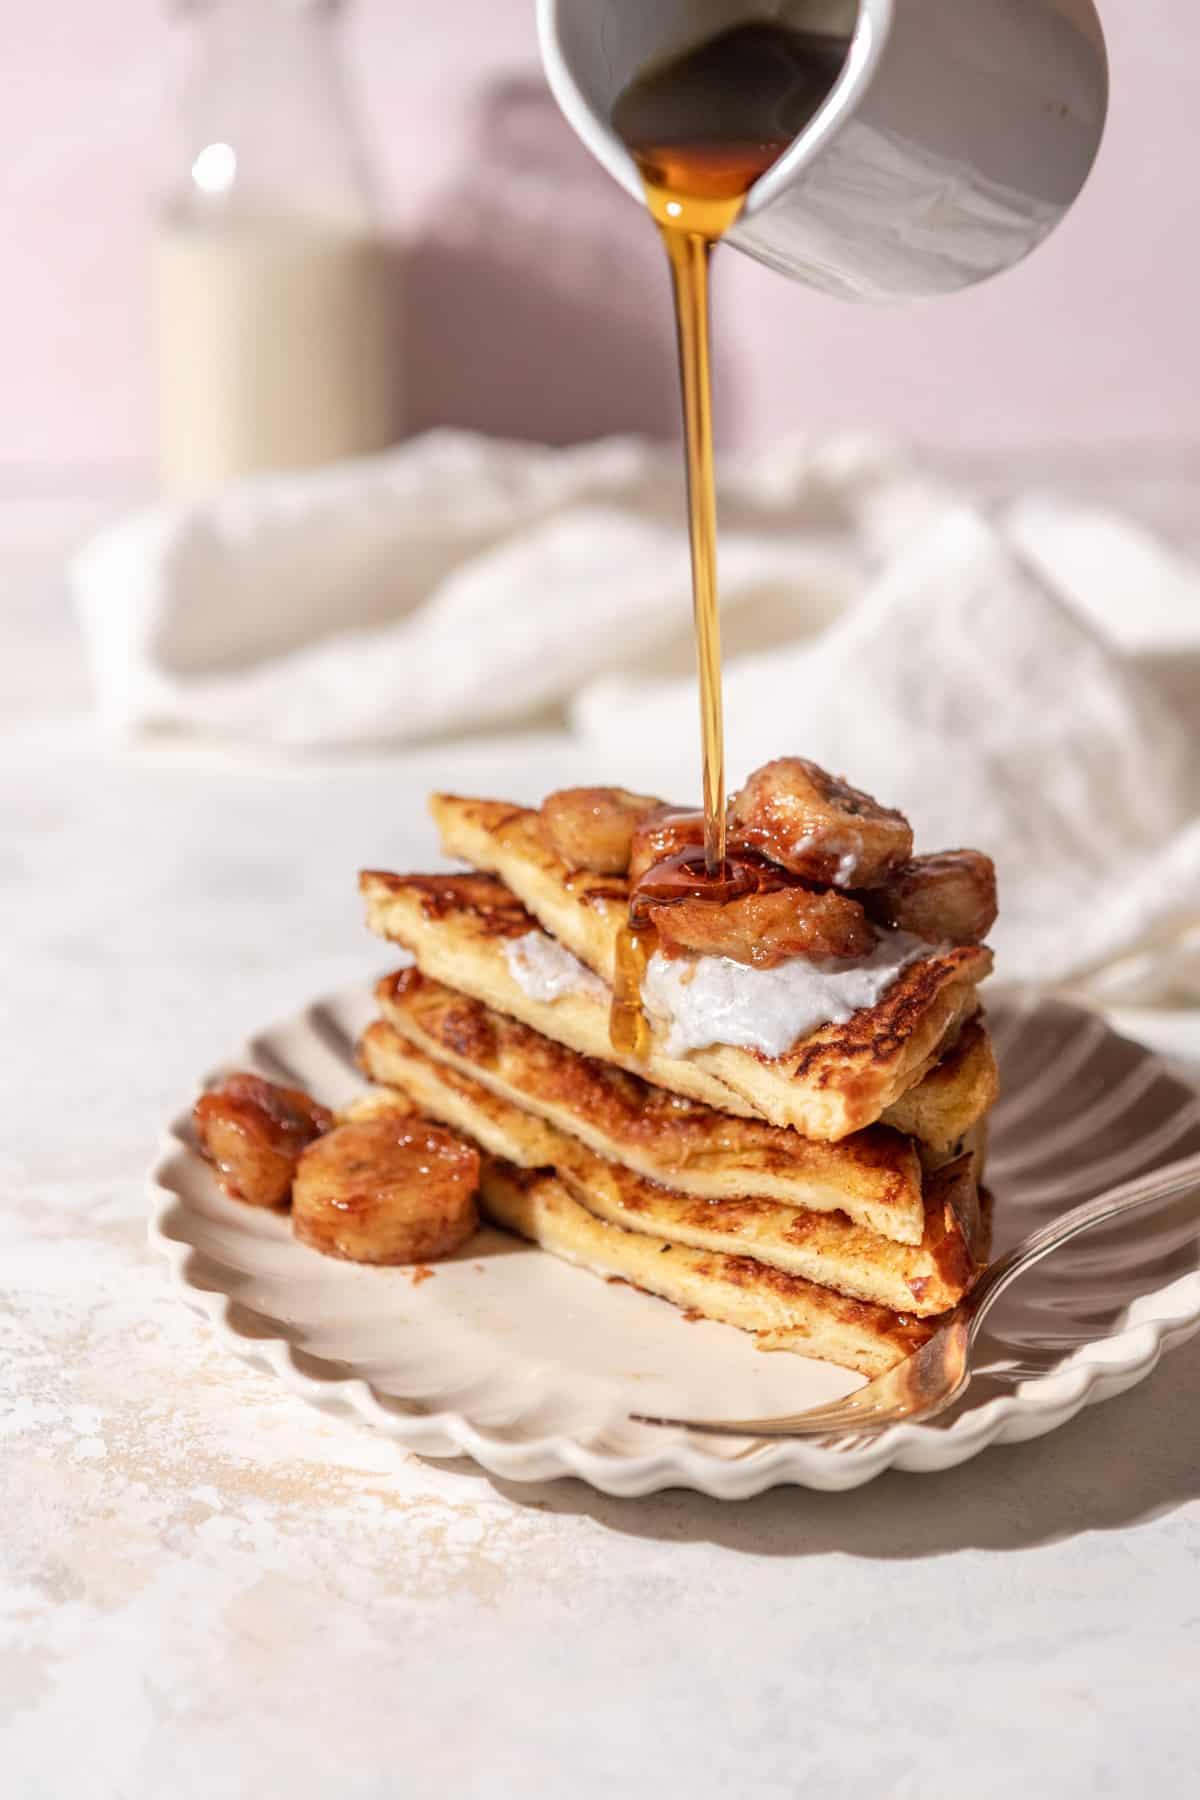 A stack of sliced French toast with maple syrup being poured over it.